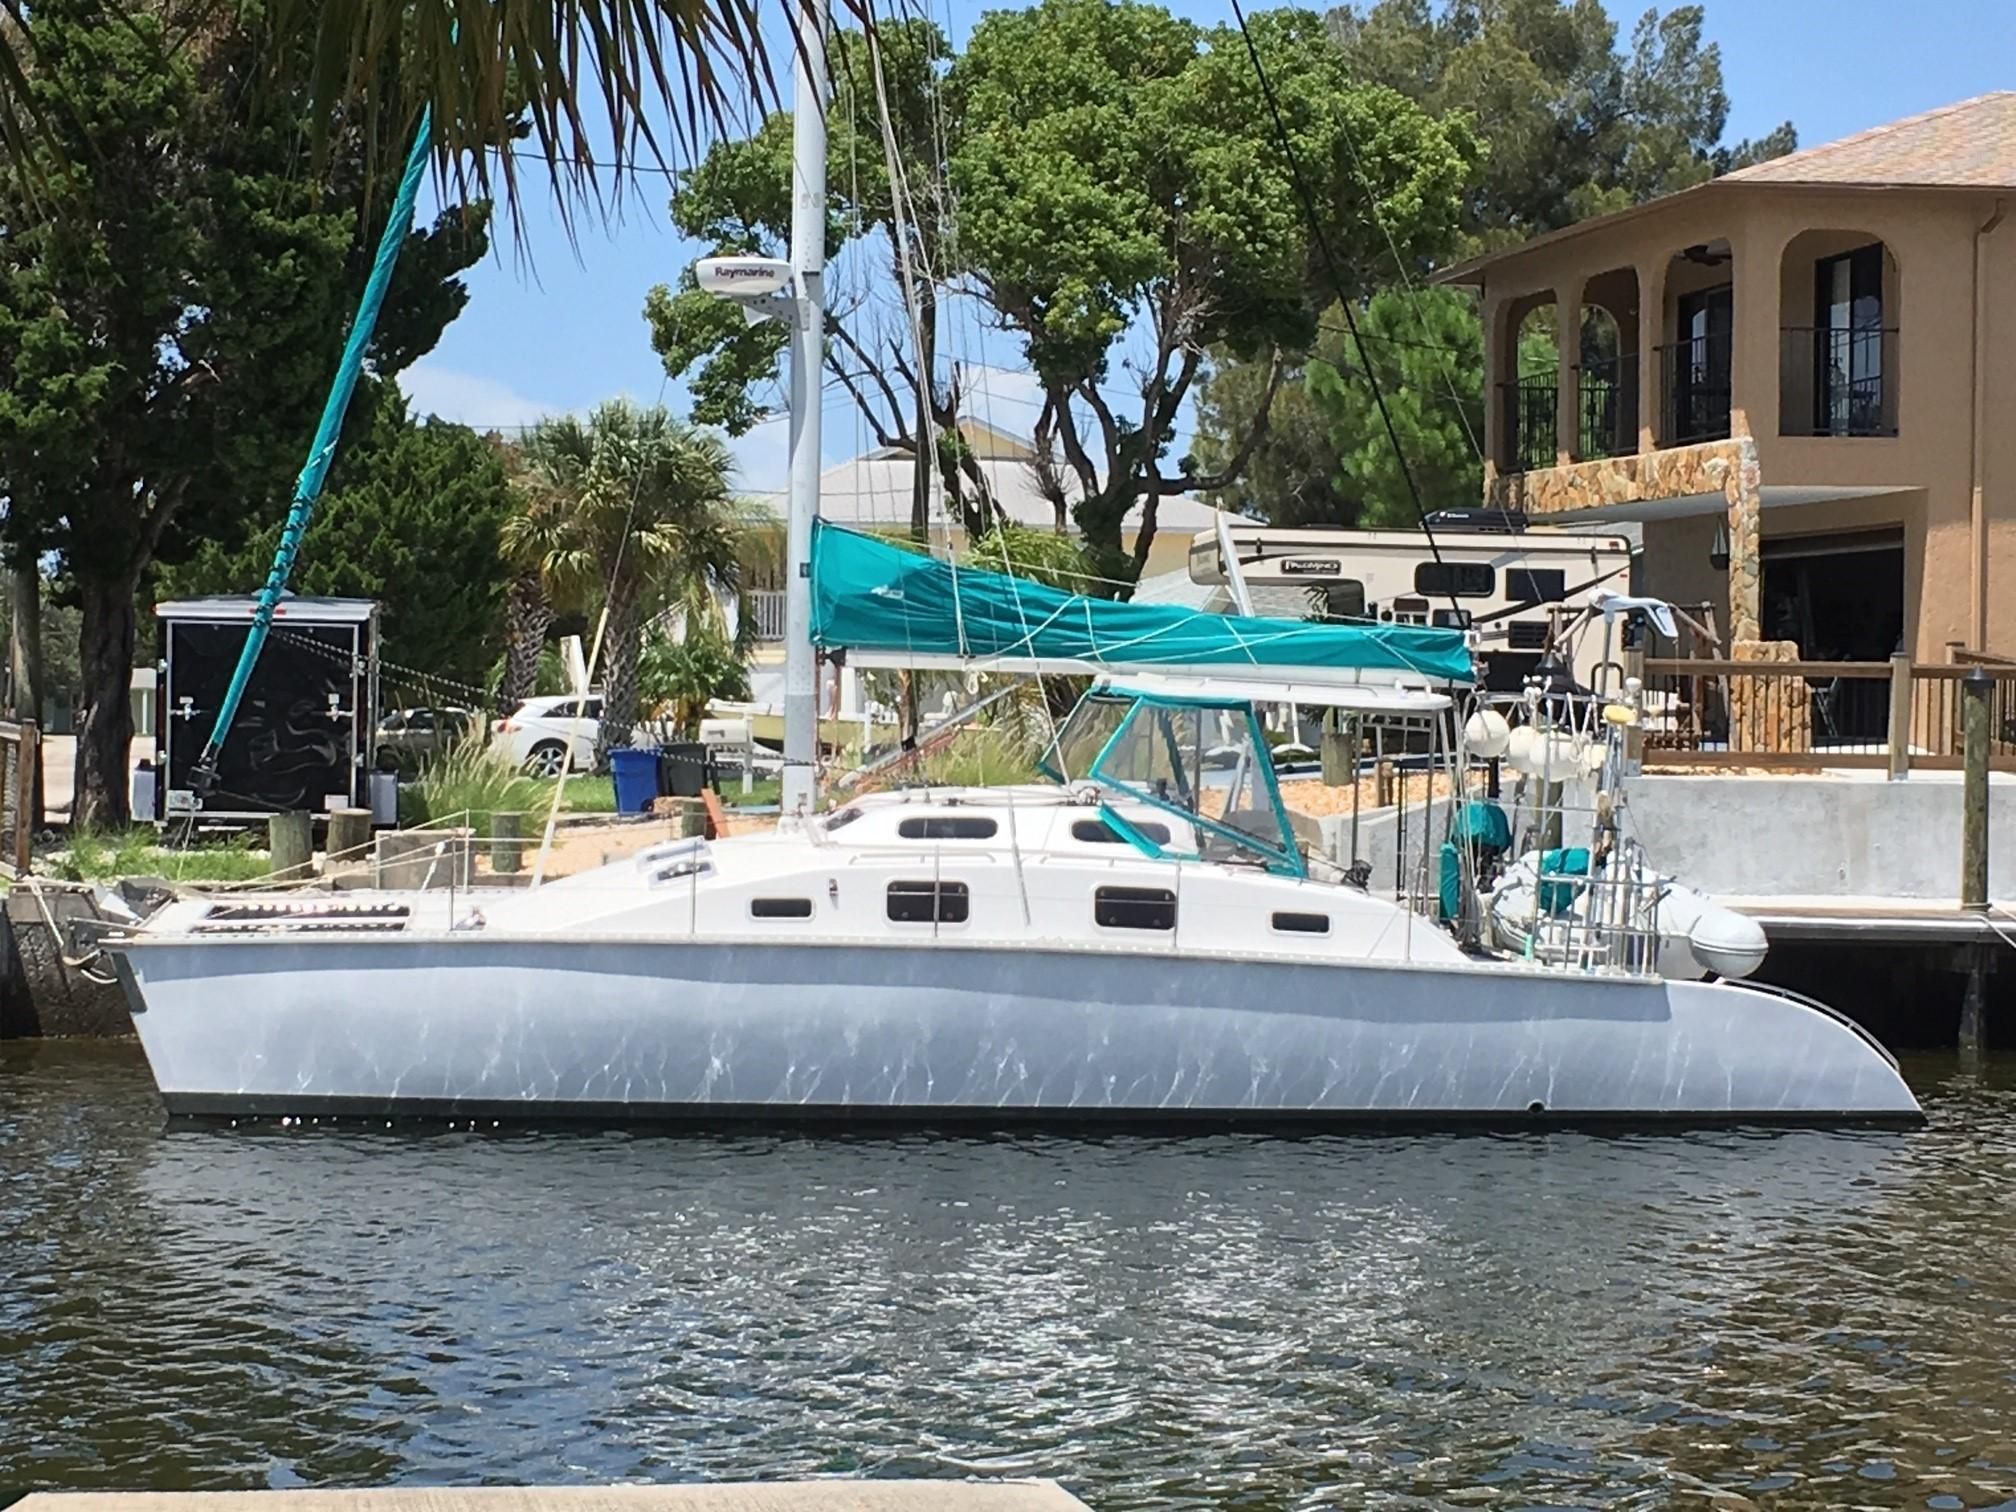 pdq catamarans for sale by owner